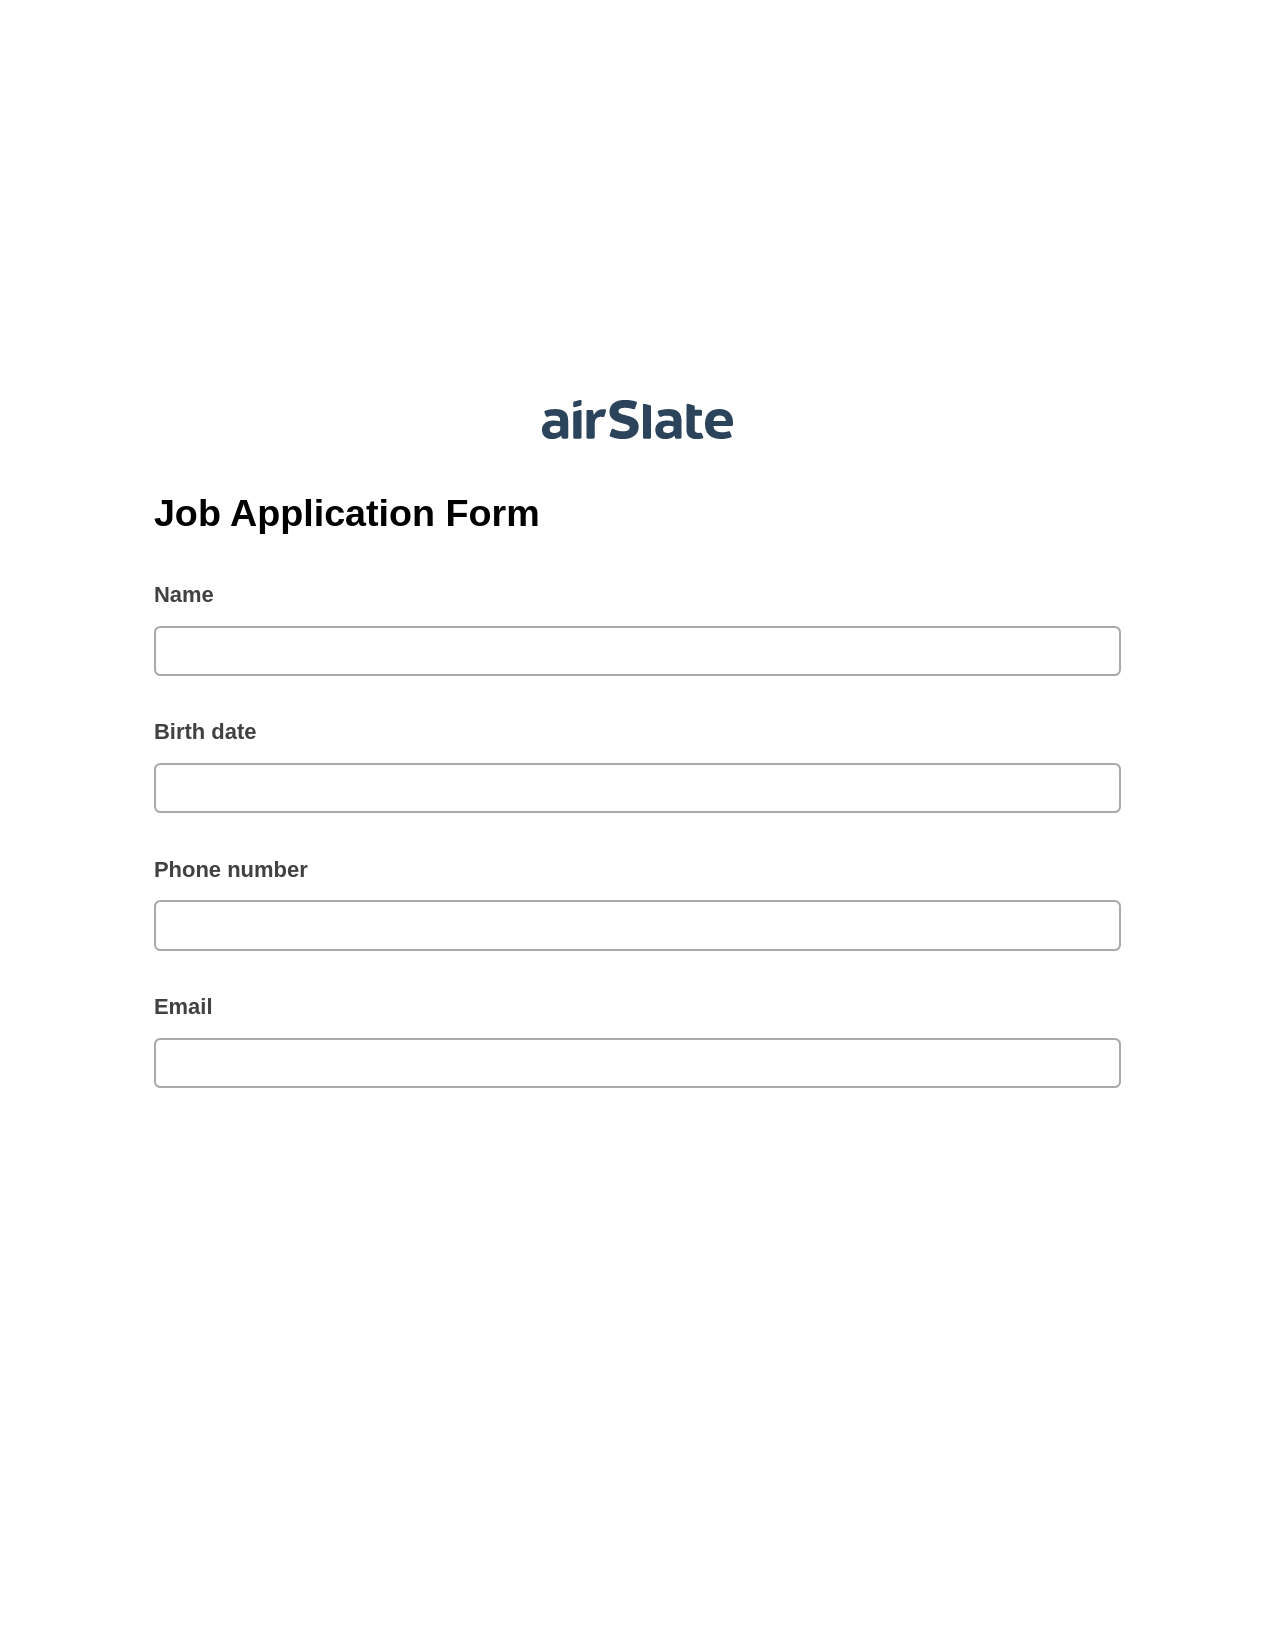 Job Application Form Pre-fill from Google Sheets Bot, Create NetSuite Records Bot, Export to MySQL Bot